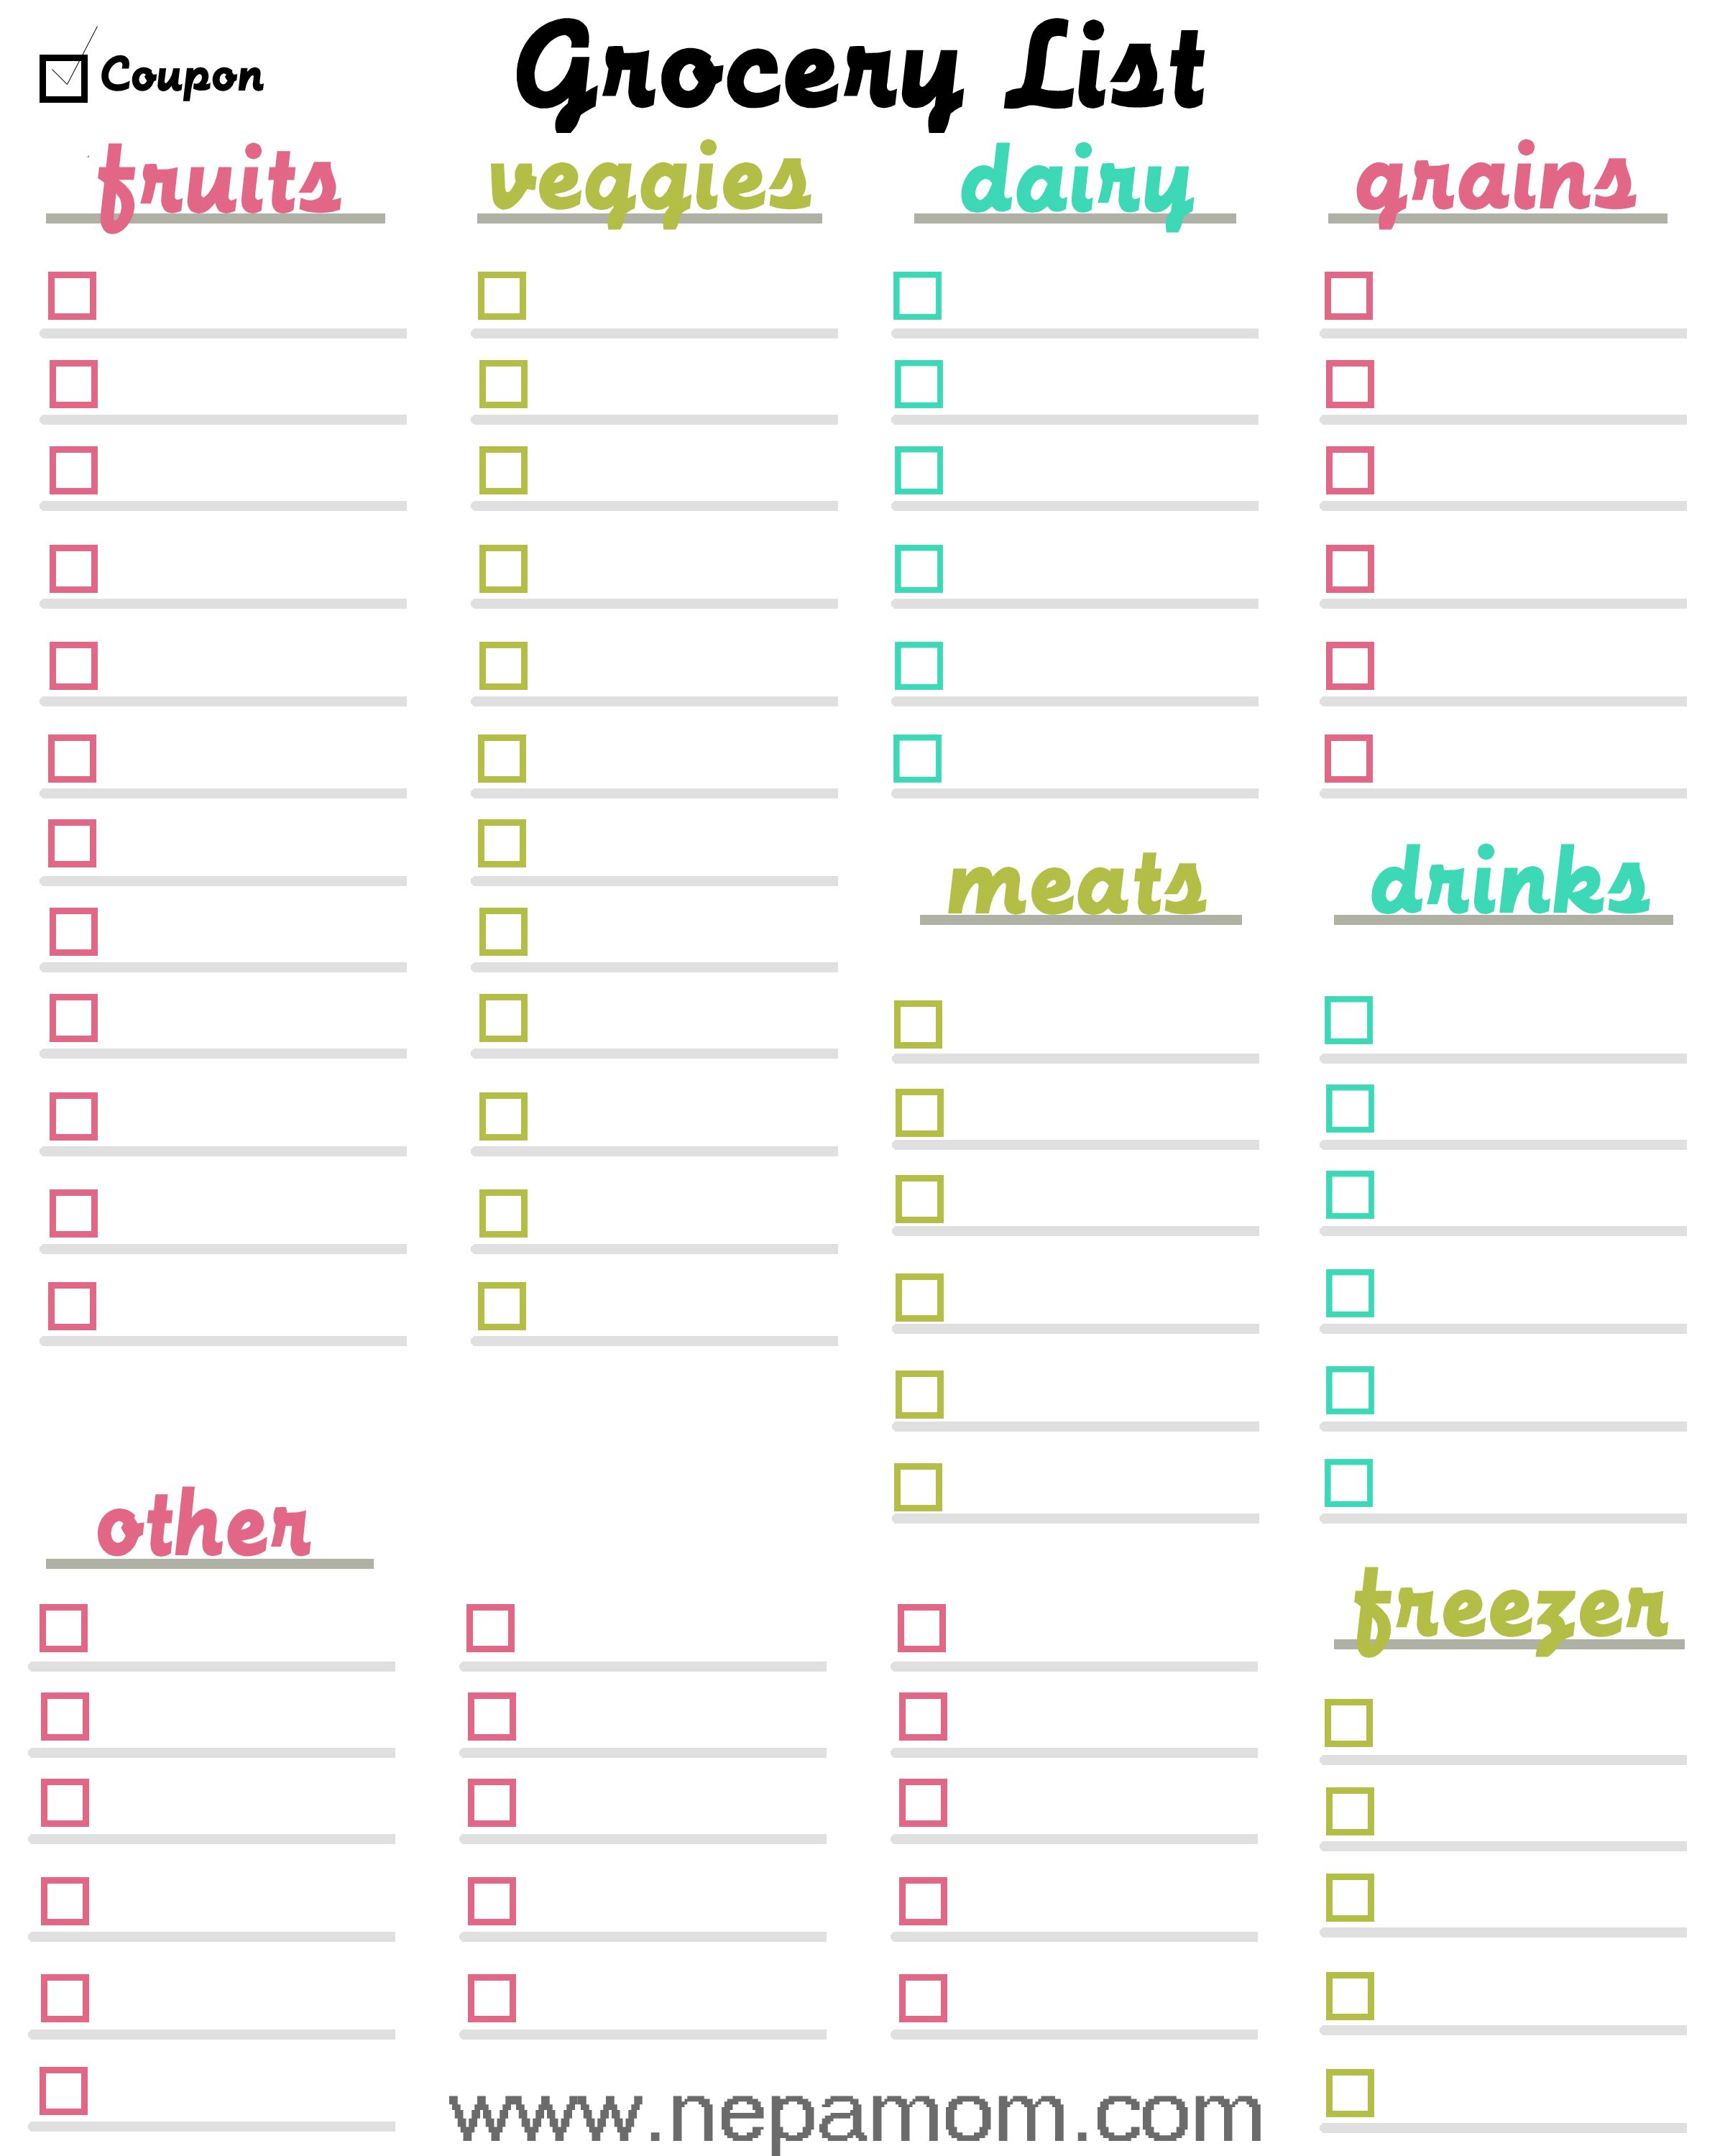 Grocery Shopping List Template  print this template out and save 